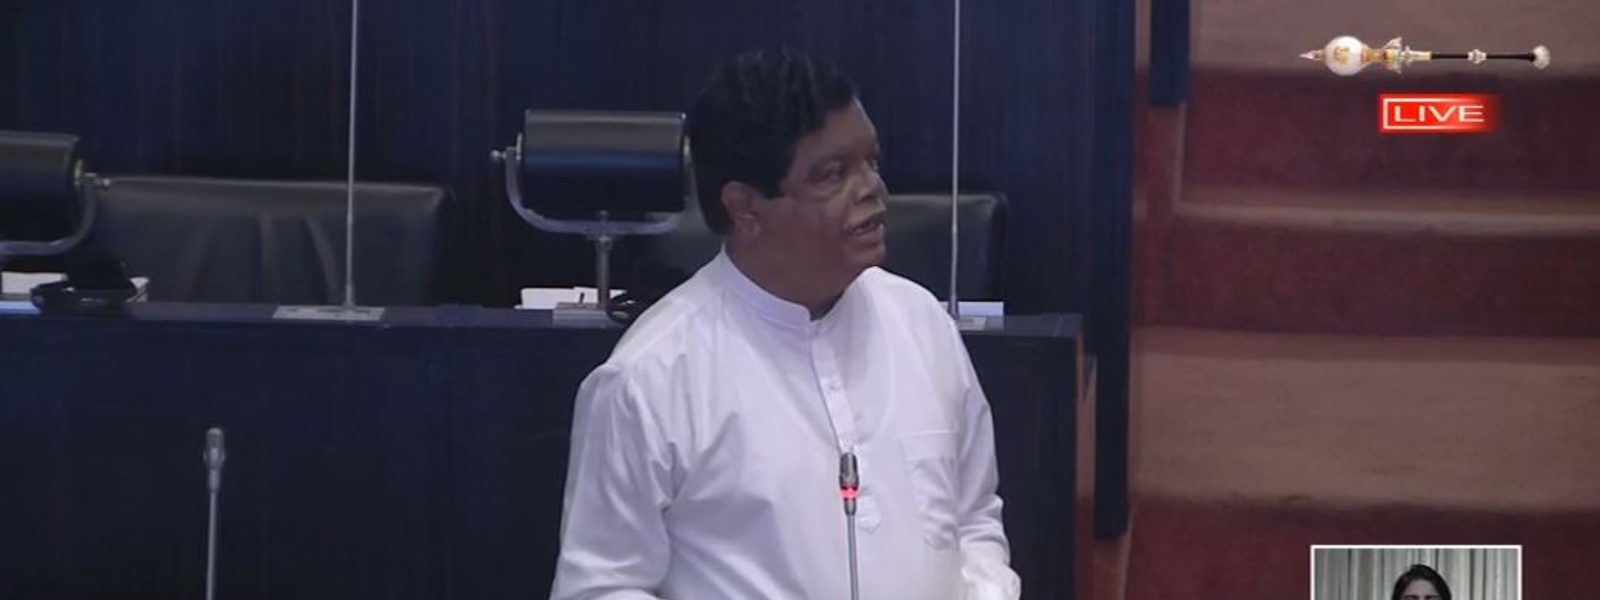 Experts say gas cylinders do not explode: Minister Bandula